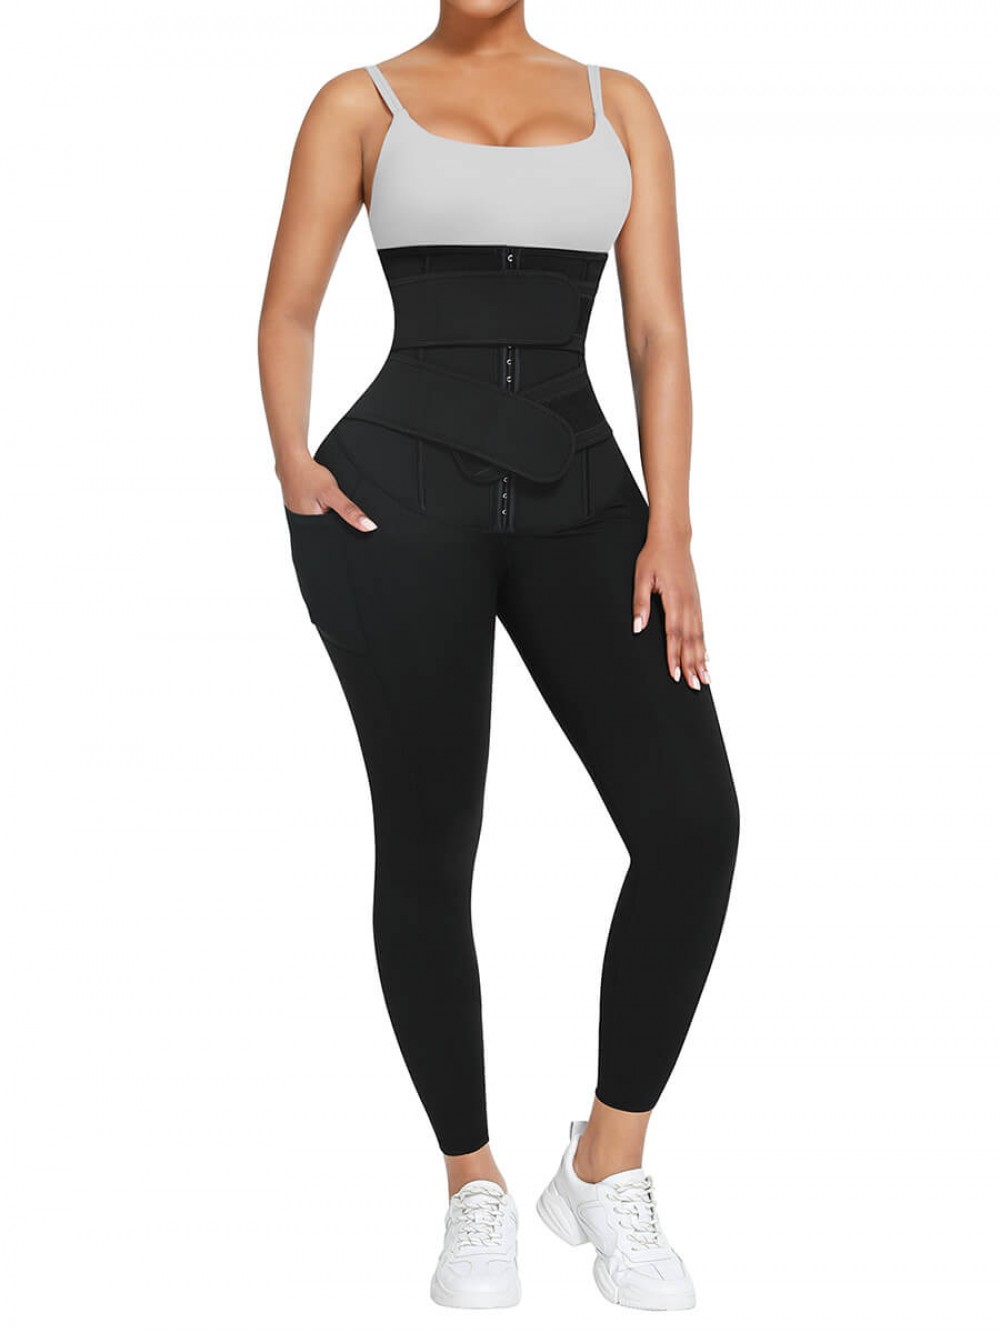 Black Ankle Pants with Blue PU Coated Lining and Double Waistbands Slimmer Belly